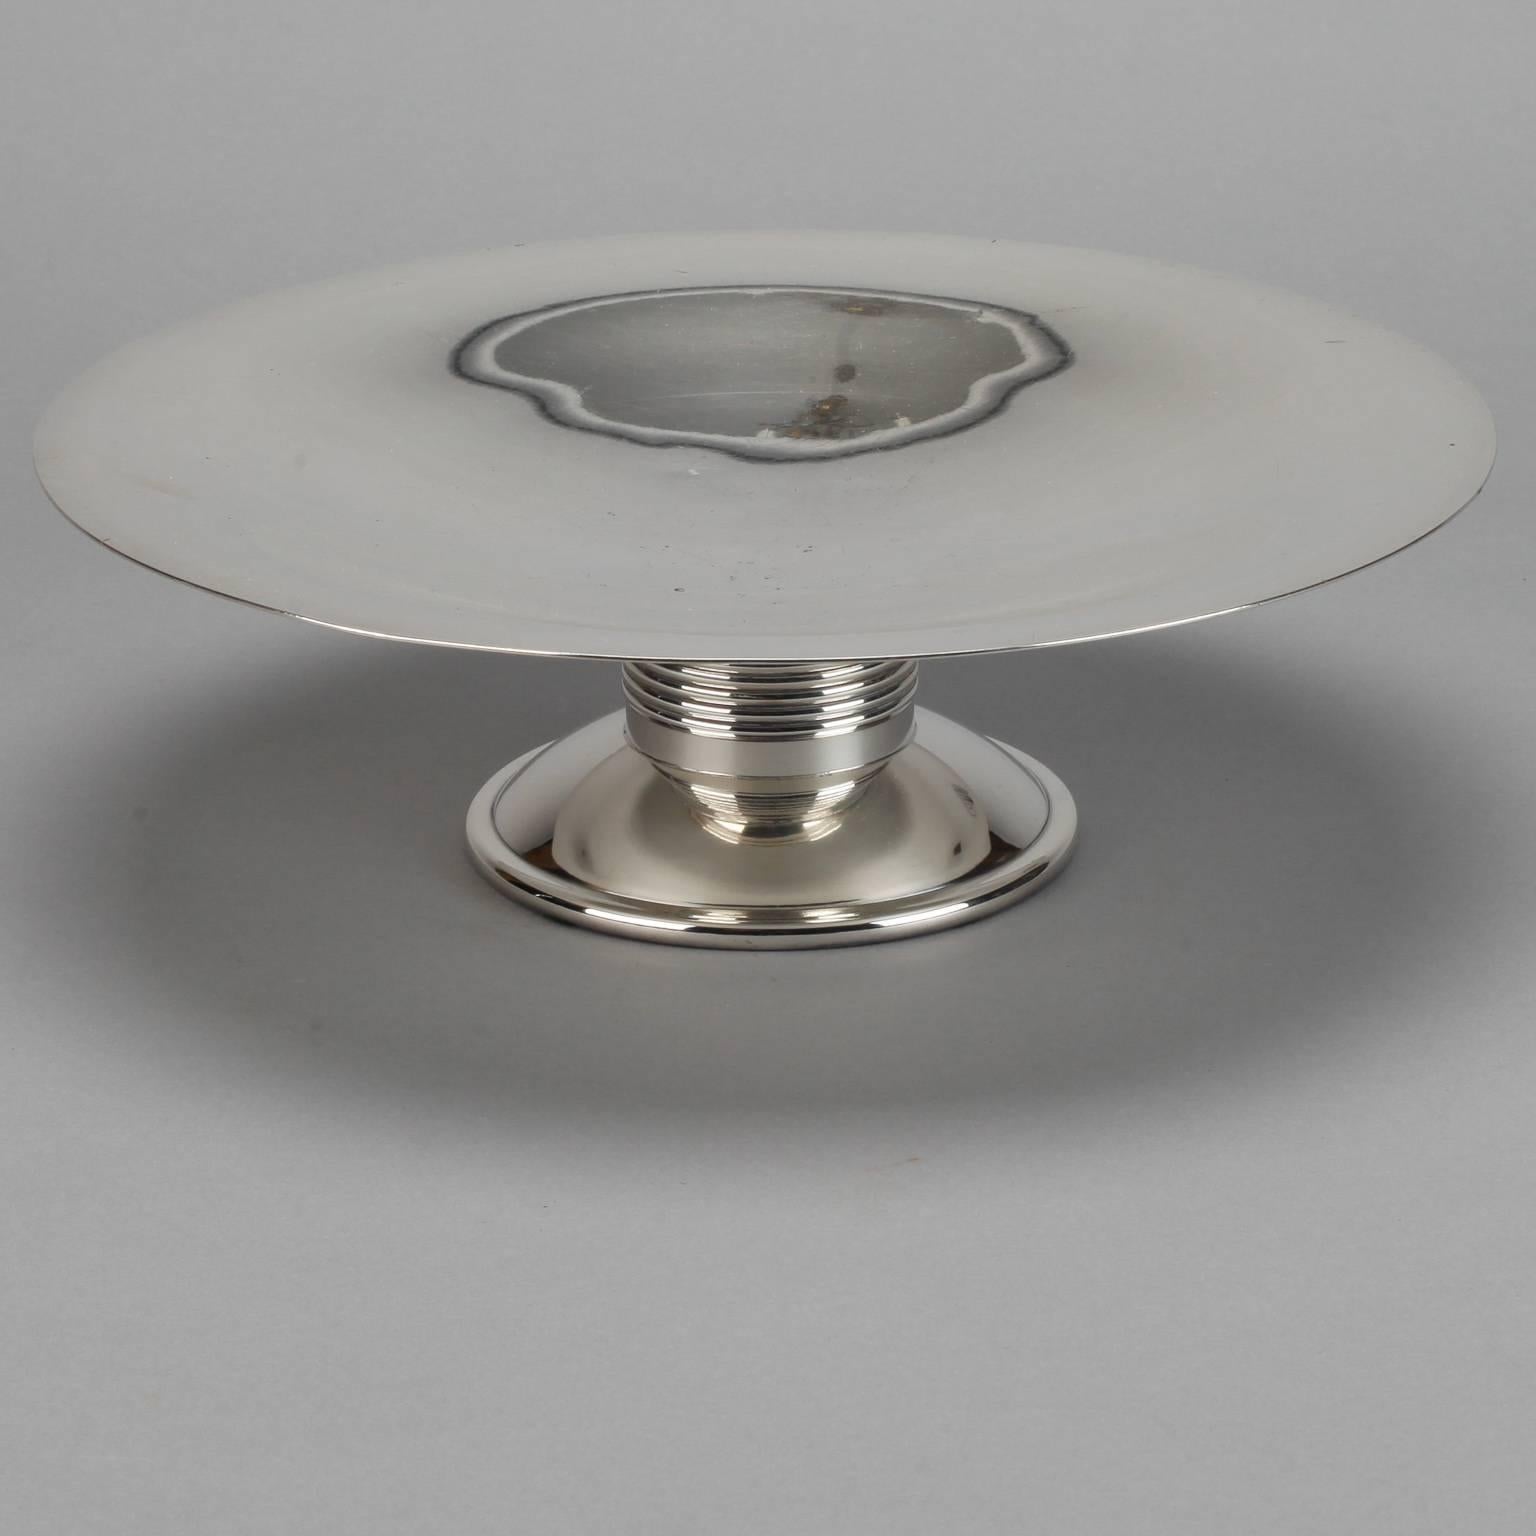 Found in England, this midcentury silver plate tazza has a Classic shape and finely reeded center support.